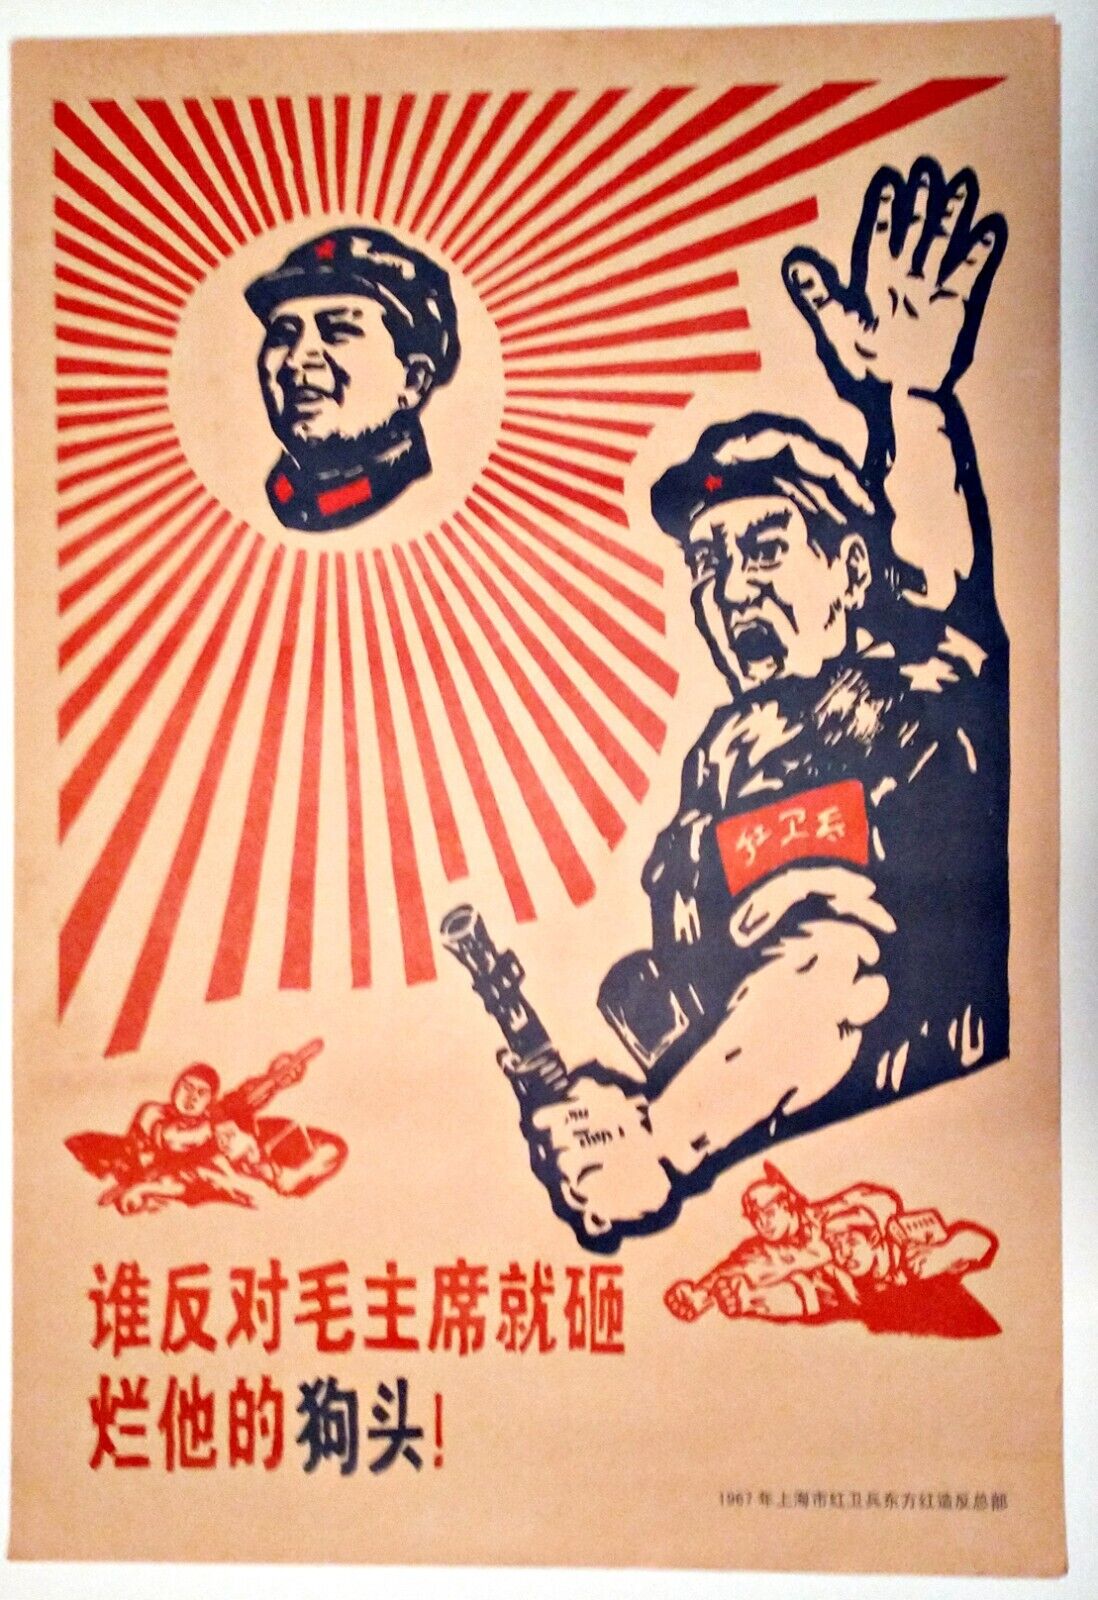 CHINESE CULTURAL REVOLUTION POSTER 60's VTGE - US SELLER - Heads will be smashed